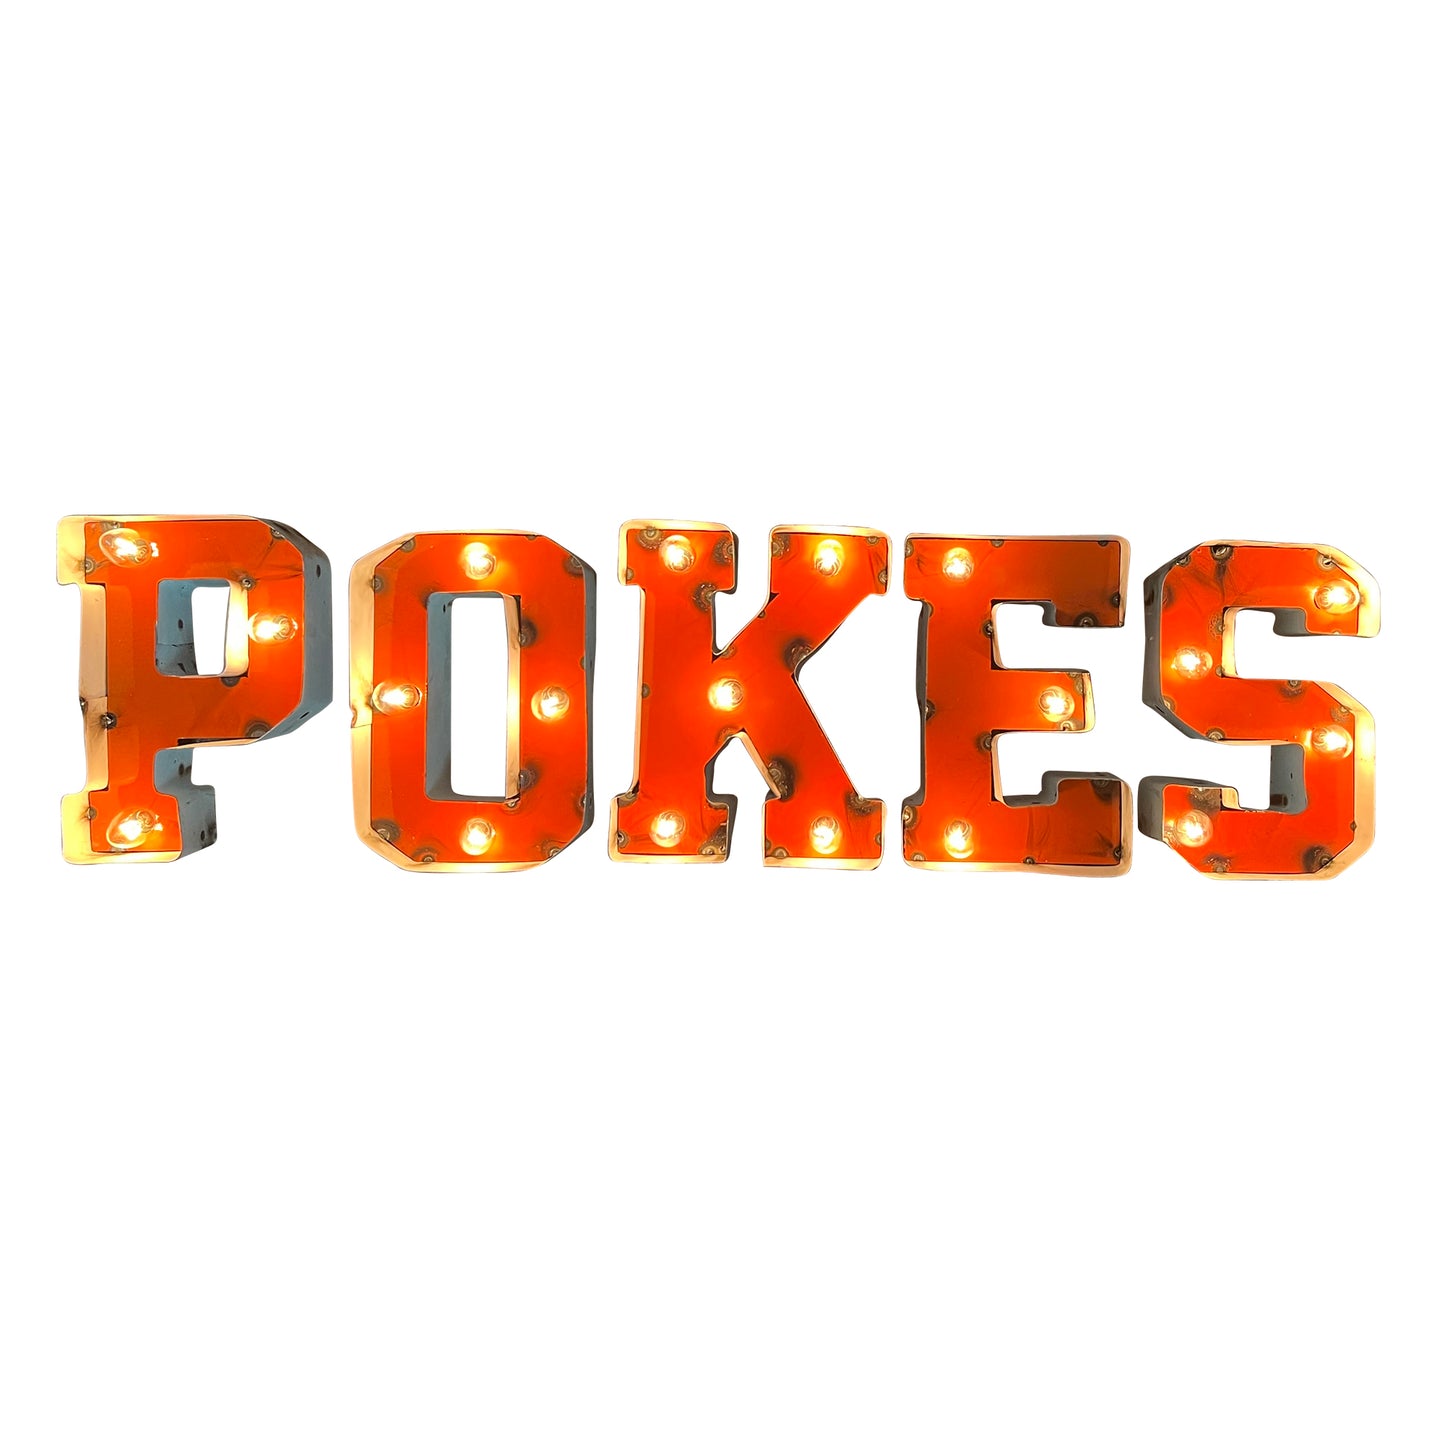 Oklahoma State University "Pokes" Lighted Recycled Metal Wall Decor